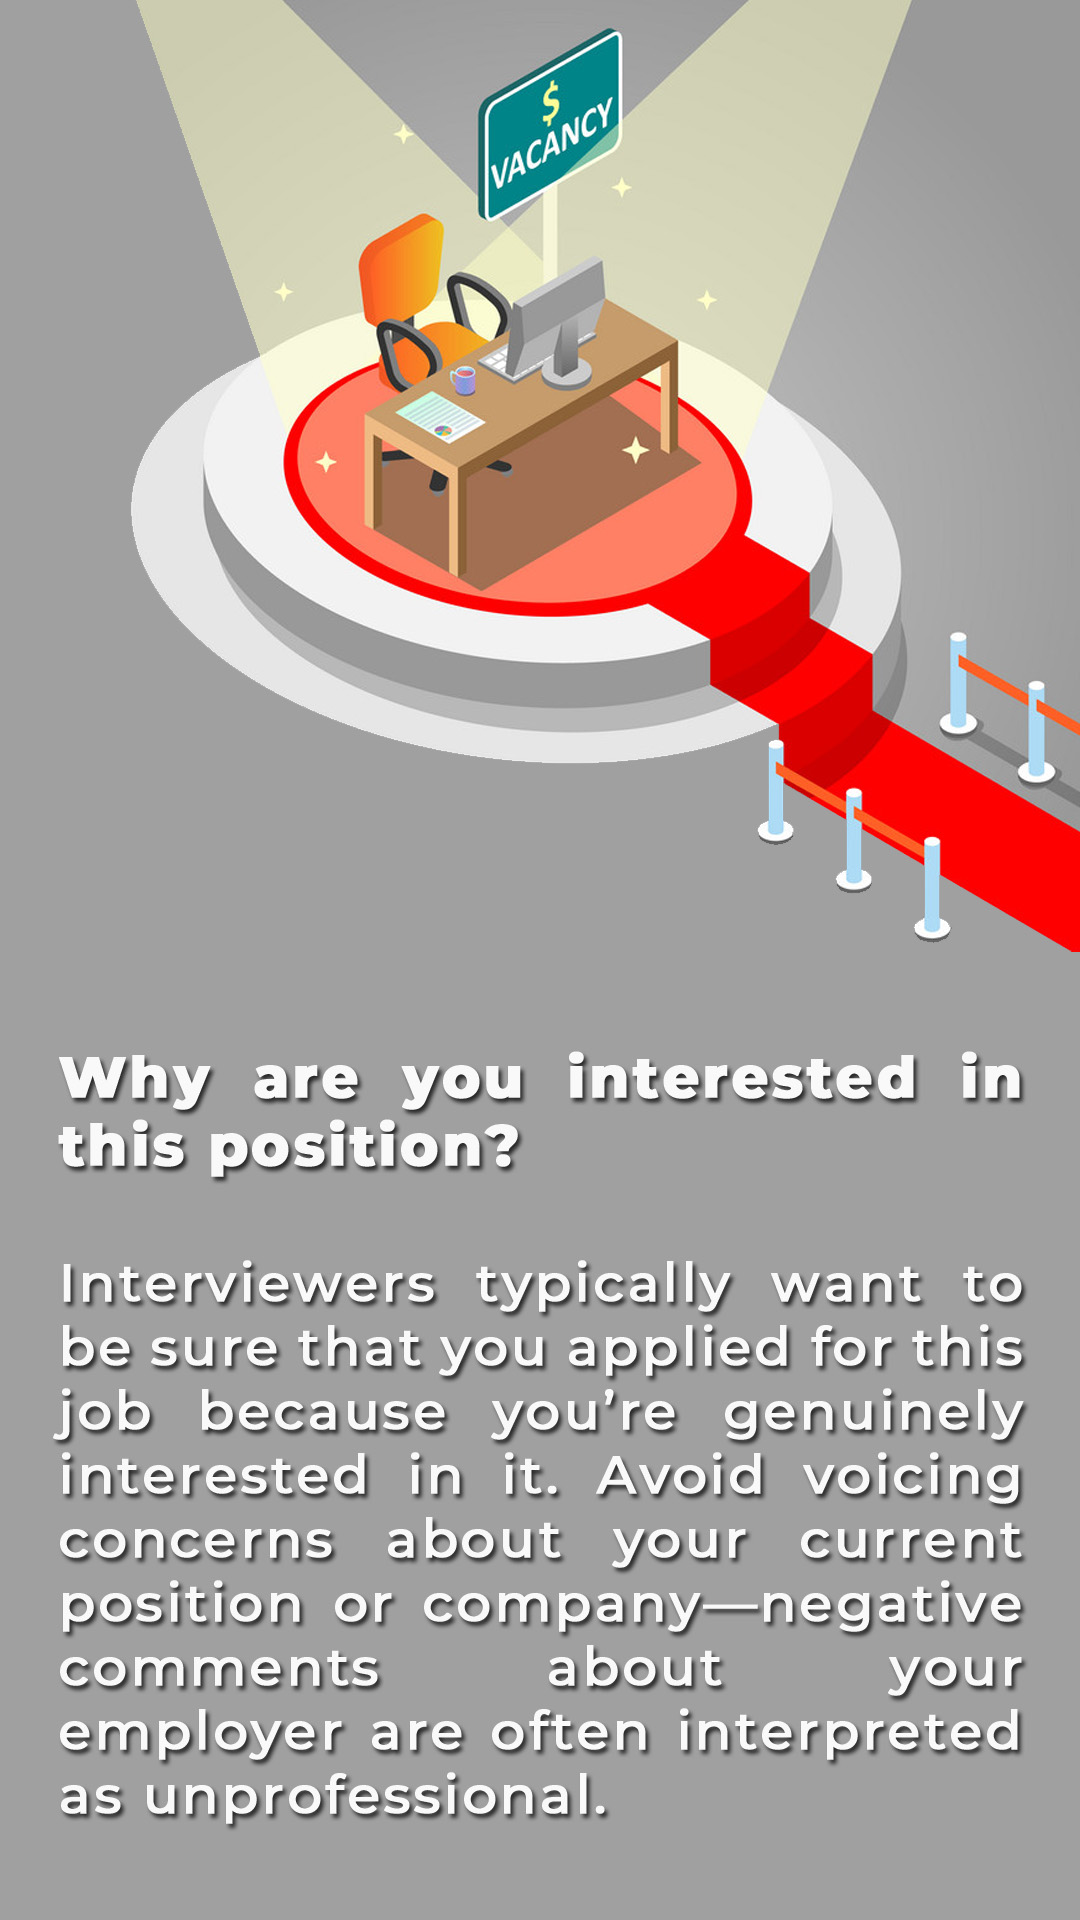 Why are you interested in this position?